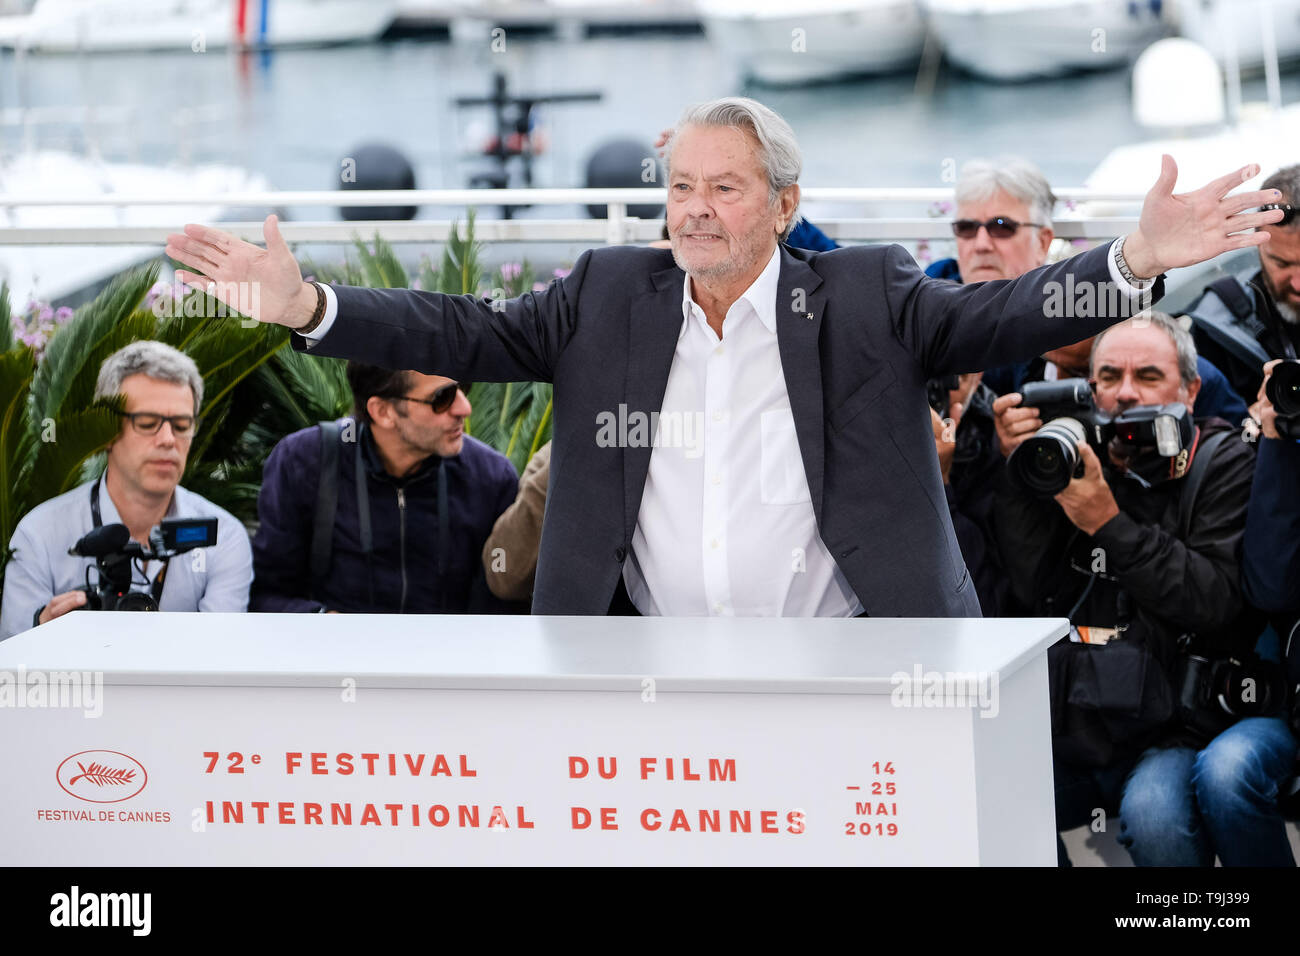 Cannes, France. 19th May, 2019. Alain Delon poses at a photocall for  Golden Palm of Honor of the 72nd Cannes Festival on Sunday 19 May 2019 at the 72nd Festival de Cannes, Palais des Festivals, Cannes. Pictured: ( Palme D’or D’honneur Du 72E Festival De Cannes ). Picture by Julie Edwards. Credit: Julie Edwards/Alamy Live News Stock Photo